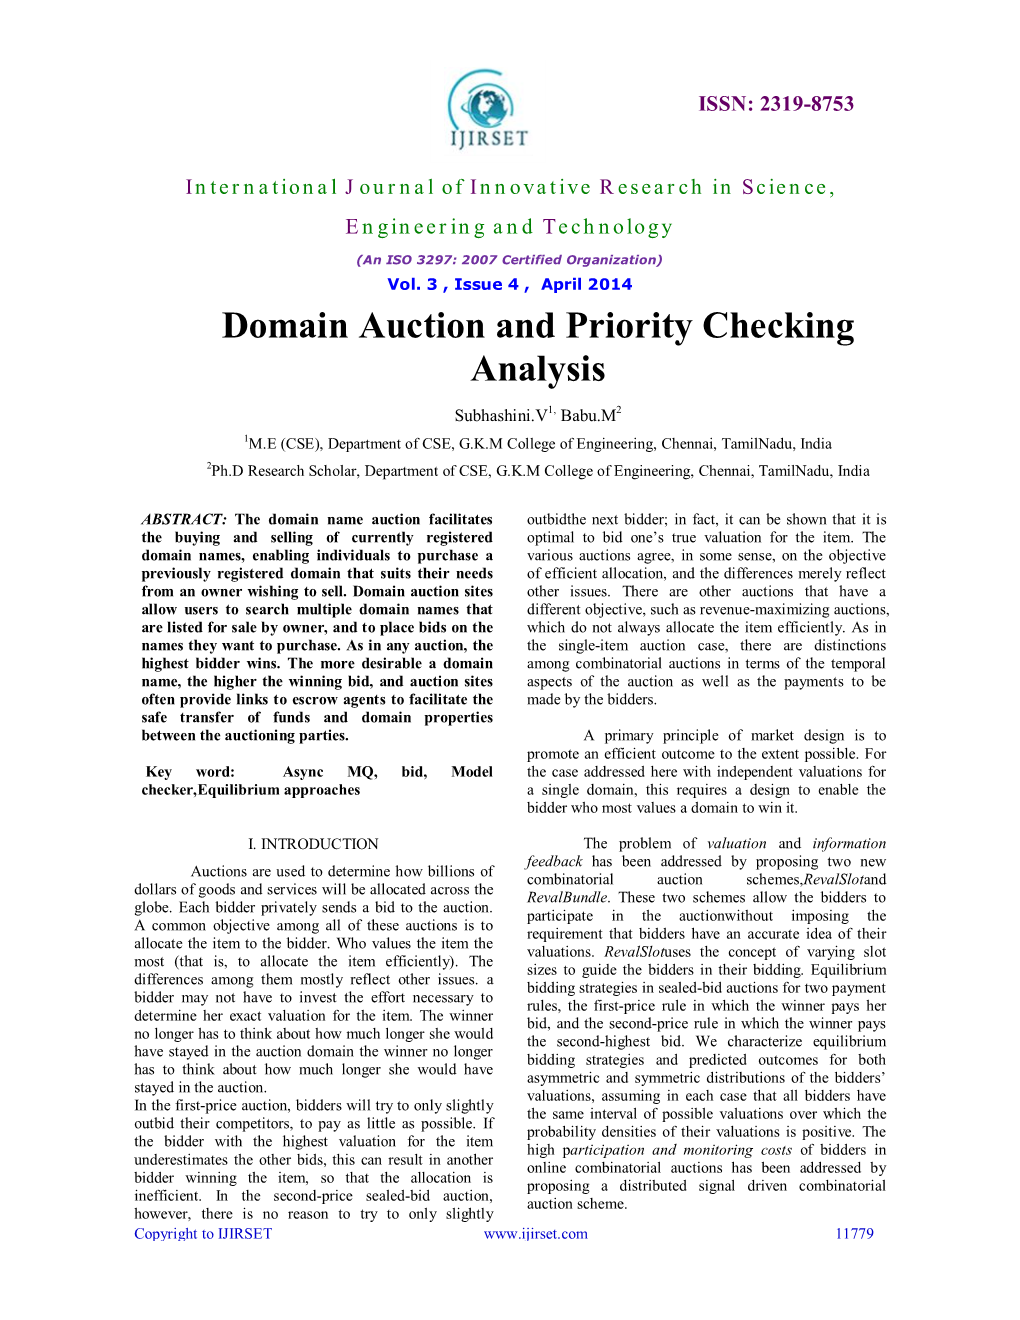 Domain Auction and Priority Checking Analysis